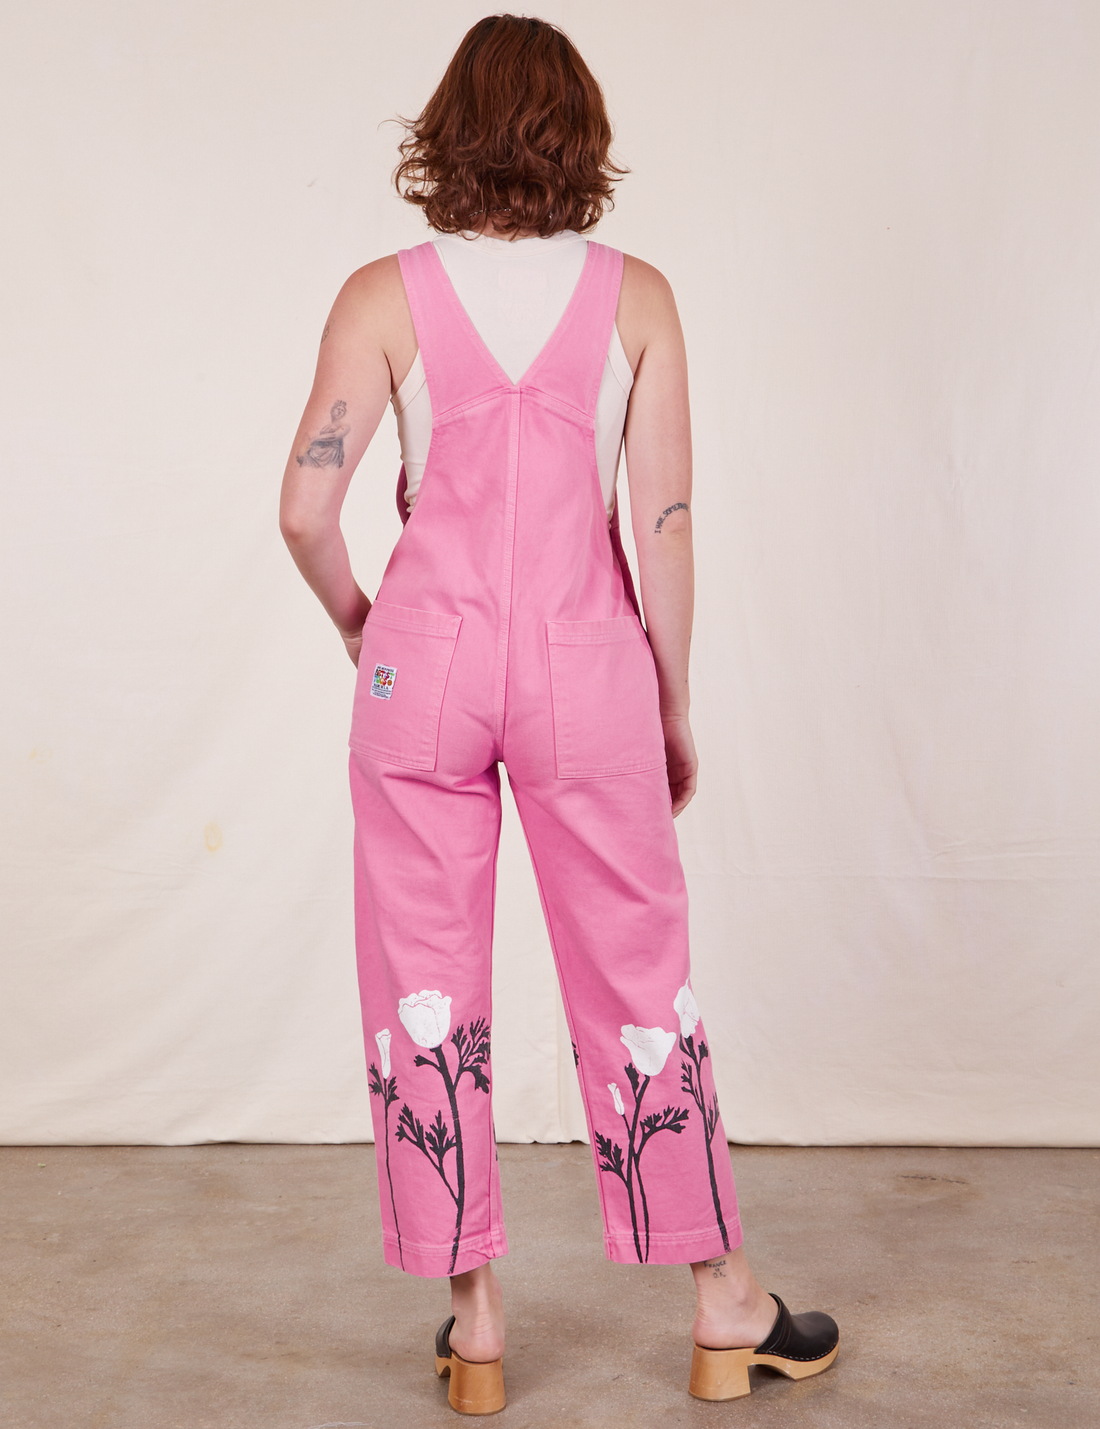 Back view of California Poppy Overalls in Bubblegum Pink and vintage off-white Tank Top worn by Alex